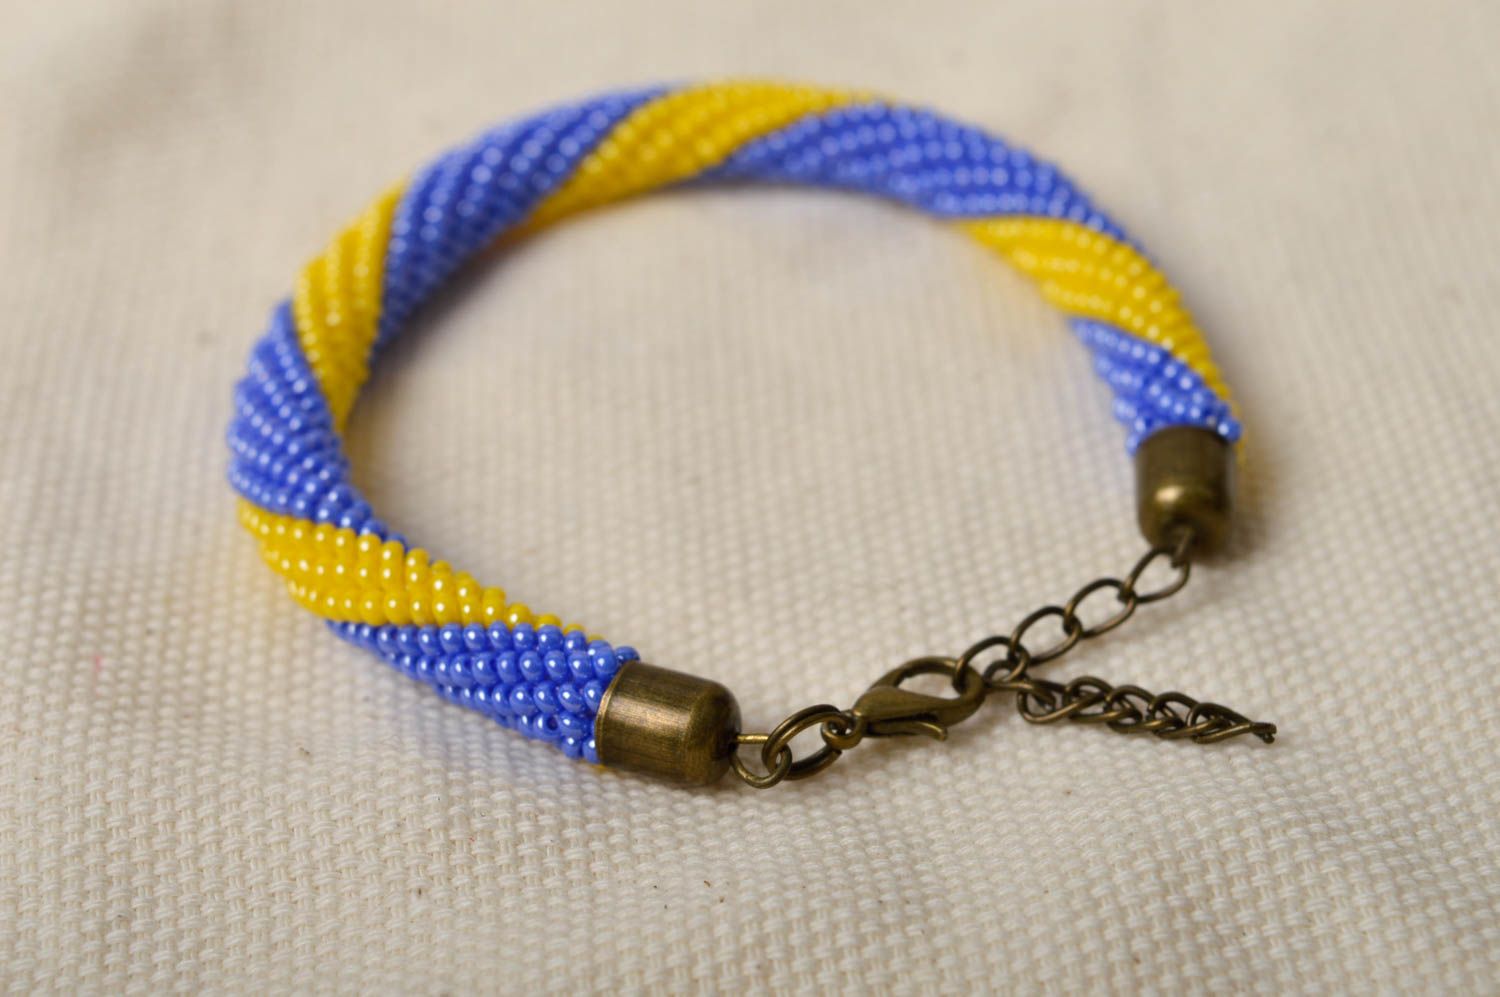 Beaded yellow and blue color wrist adjustable bracelet photo 1